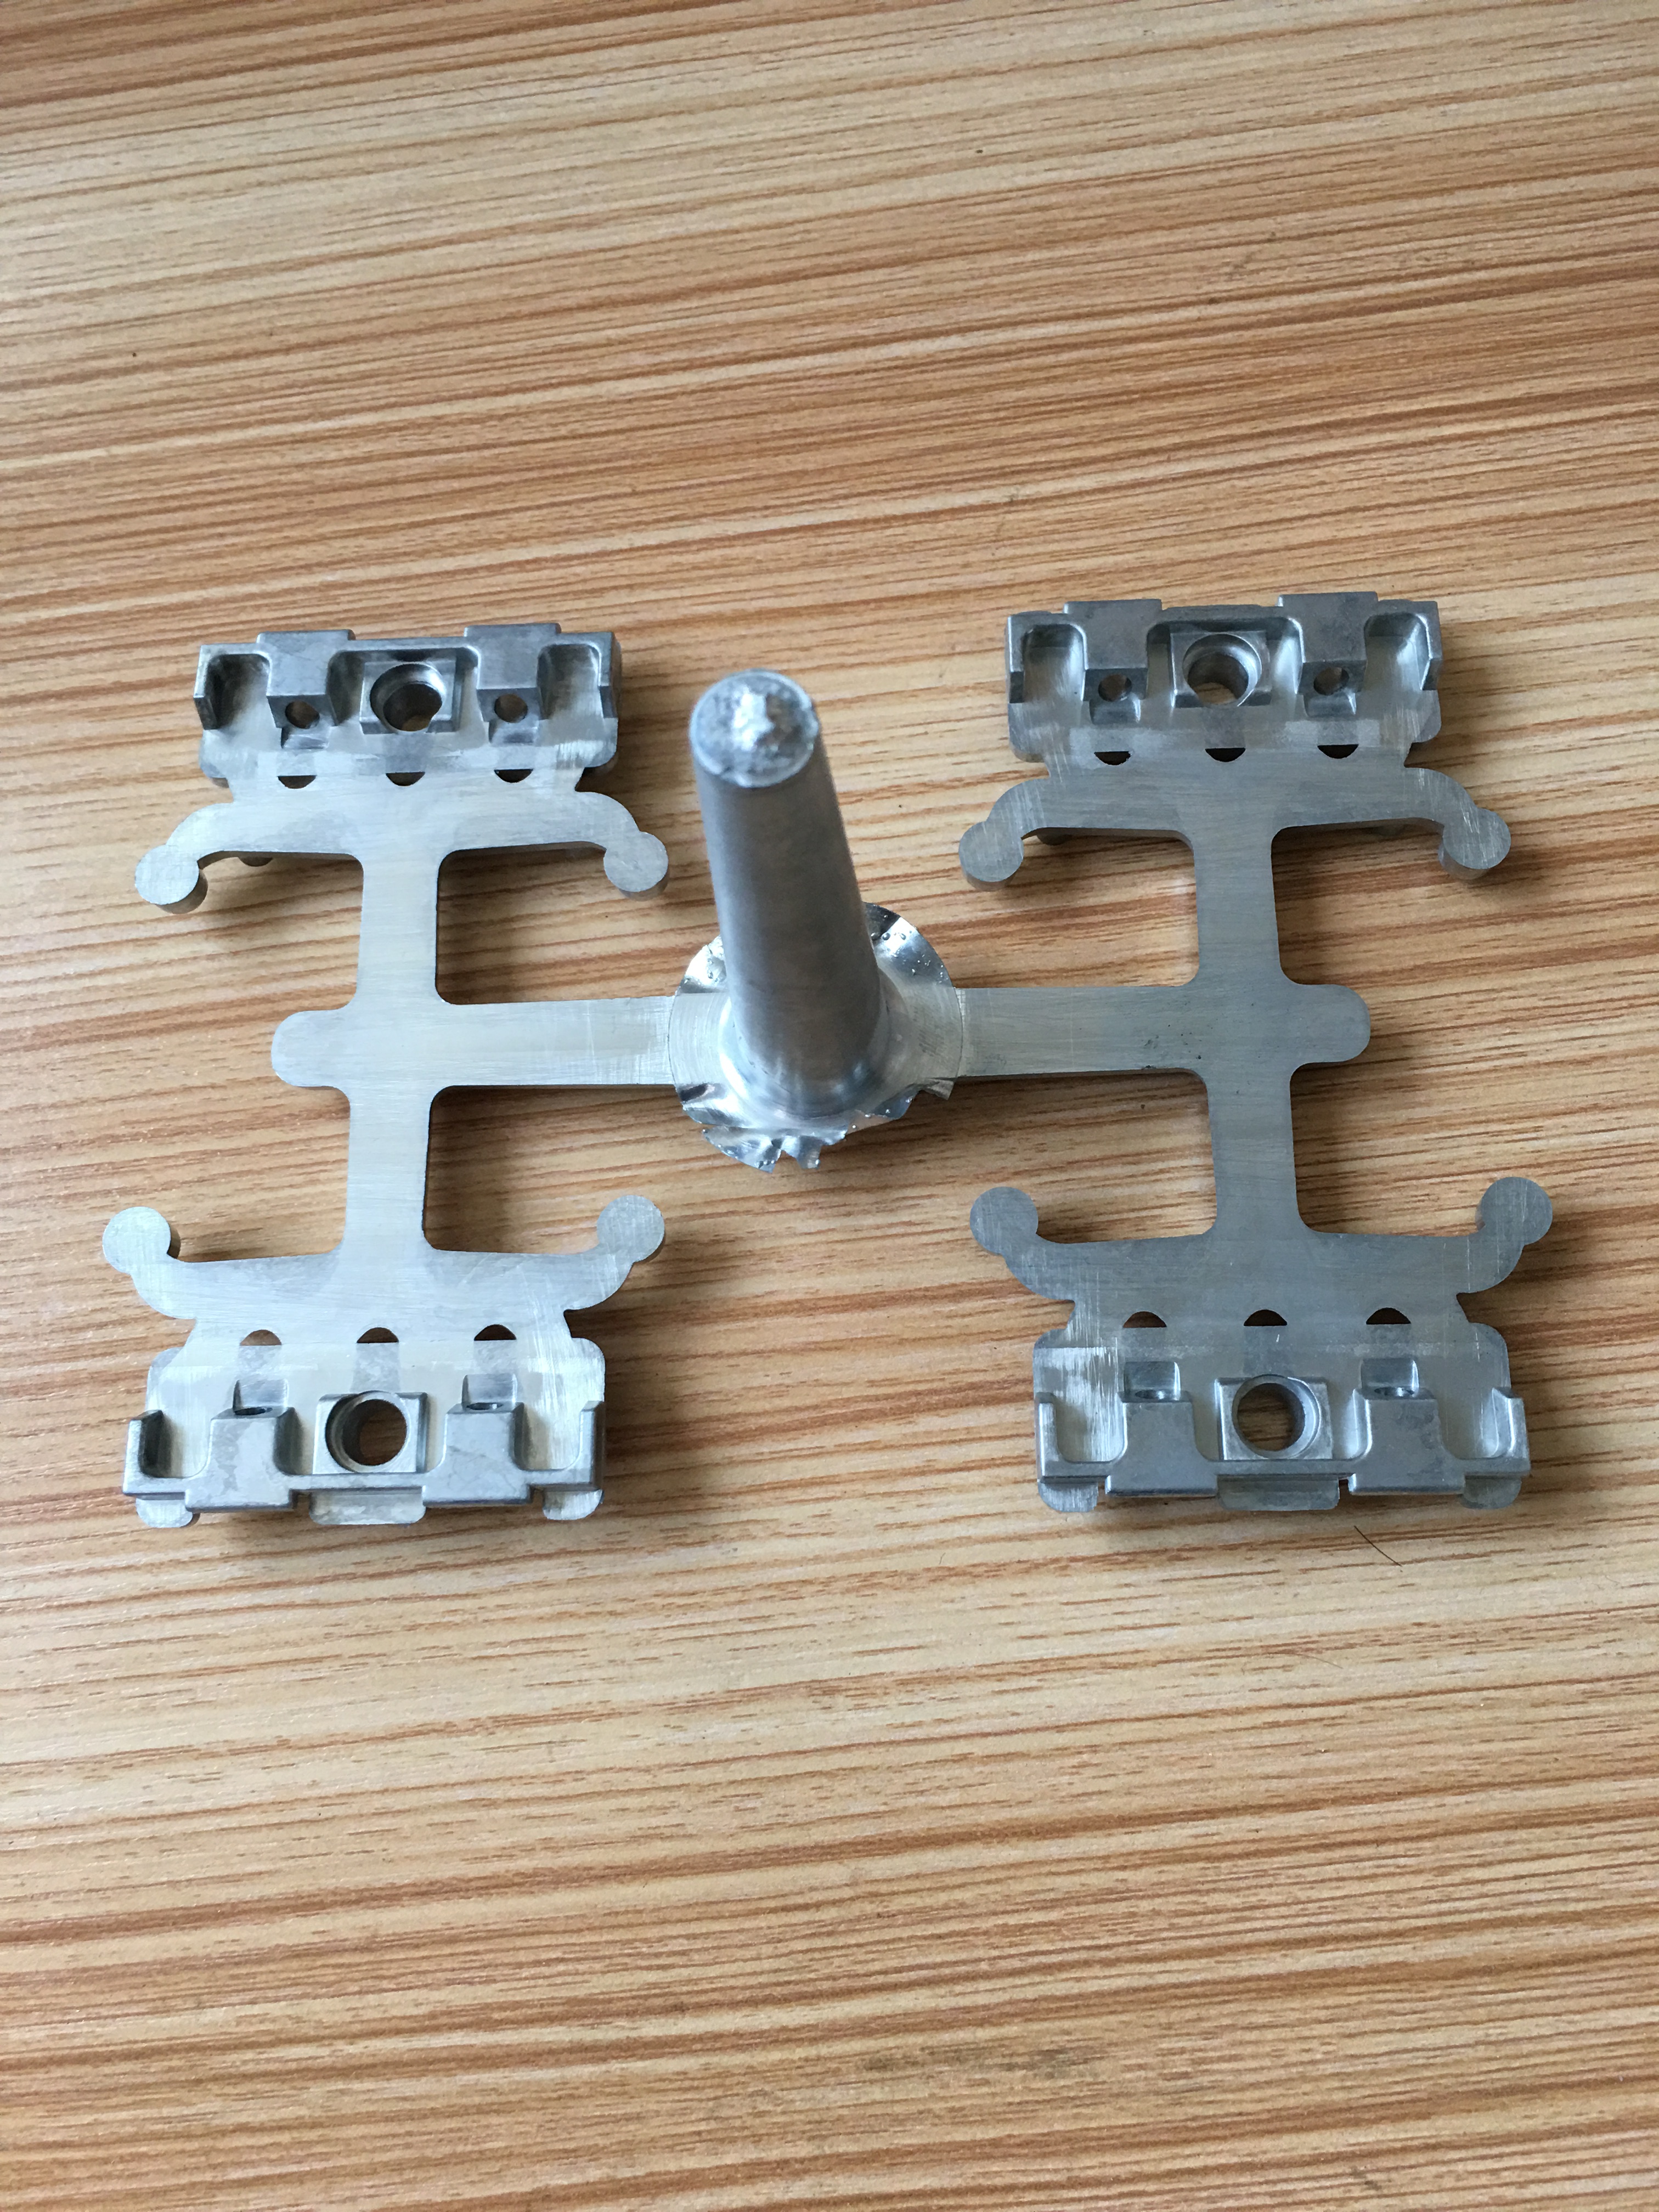 As a plastic bottle cap mould manufacturer,what is the main difference between metal molds and plastic molds?